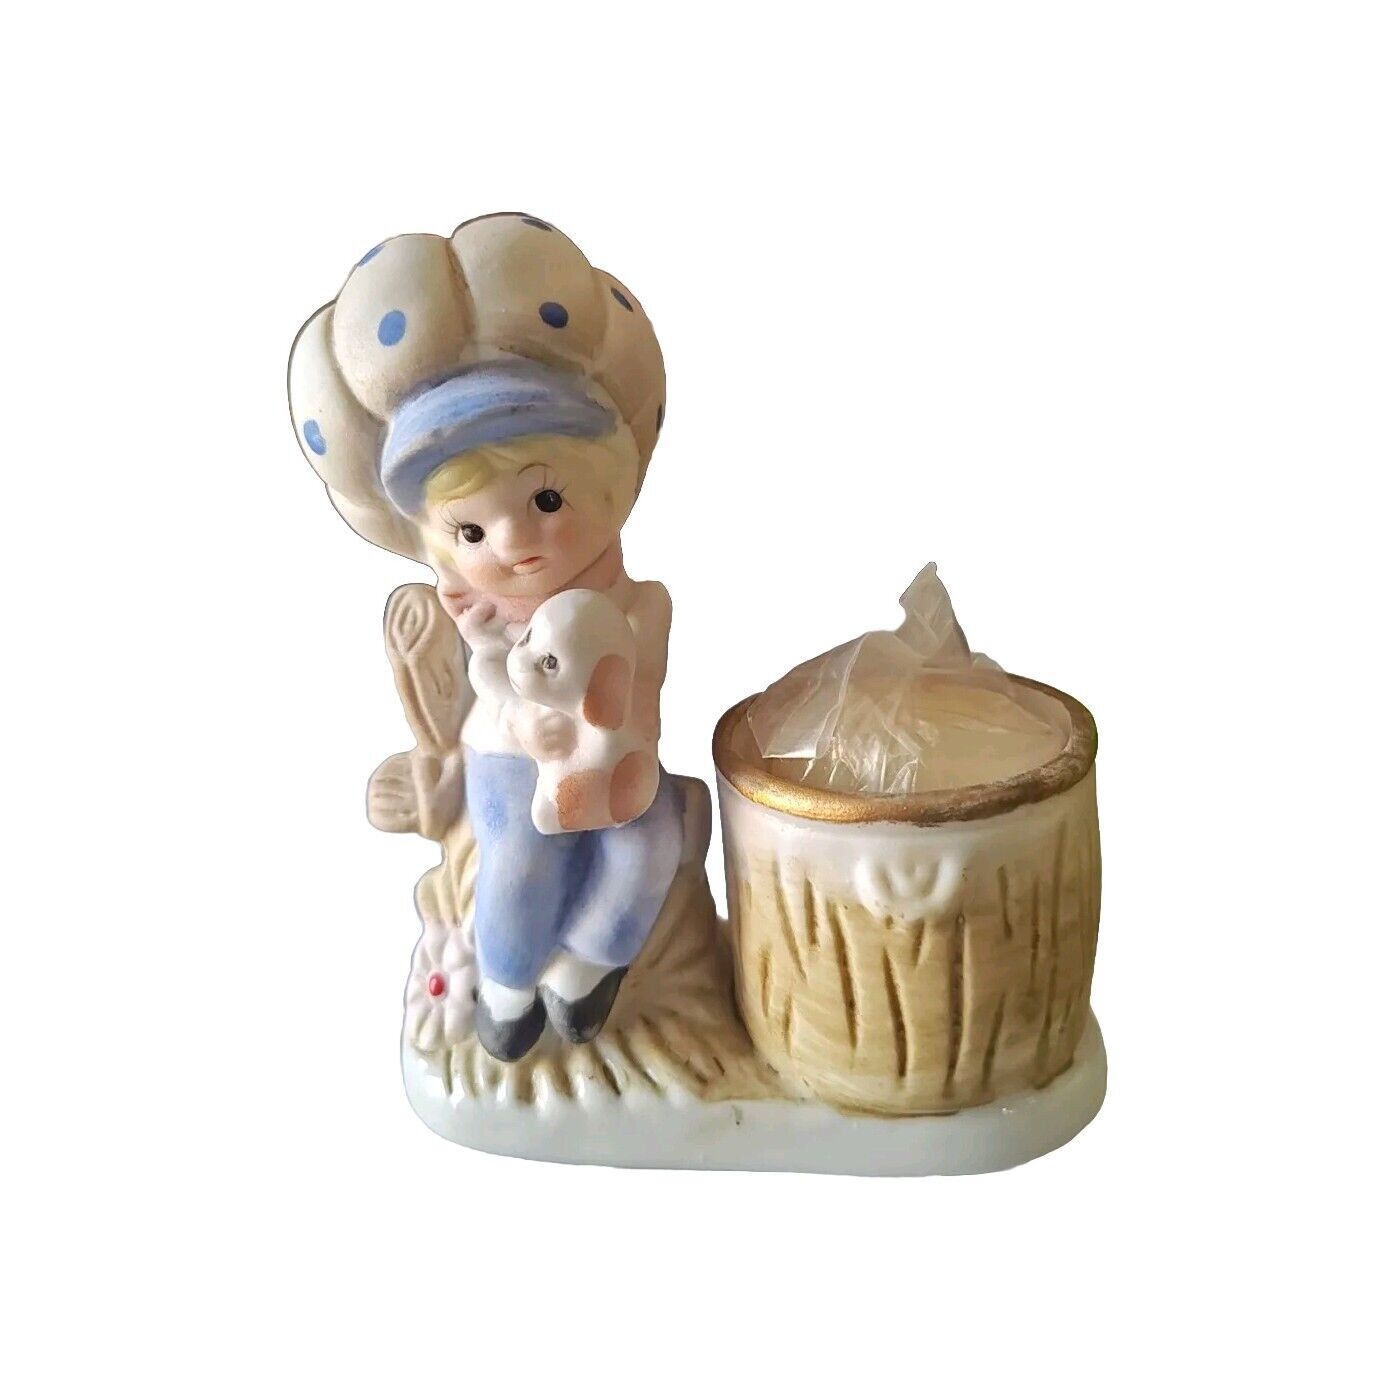 Vintage Little Luvkins Boy With Puppy toothpick/match holder